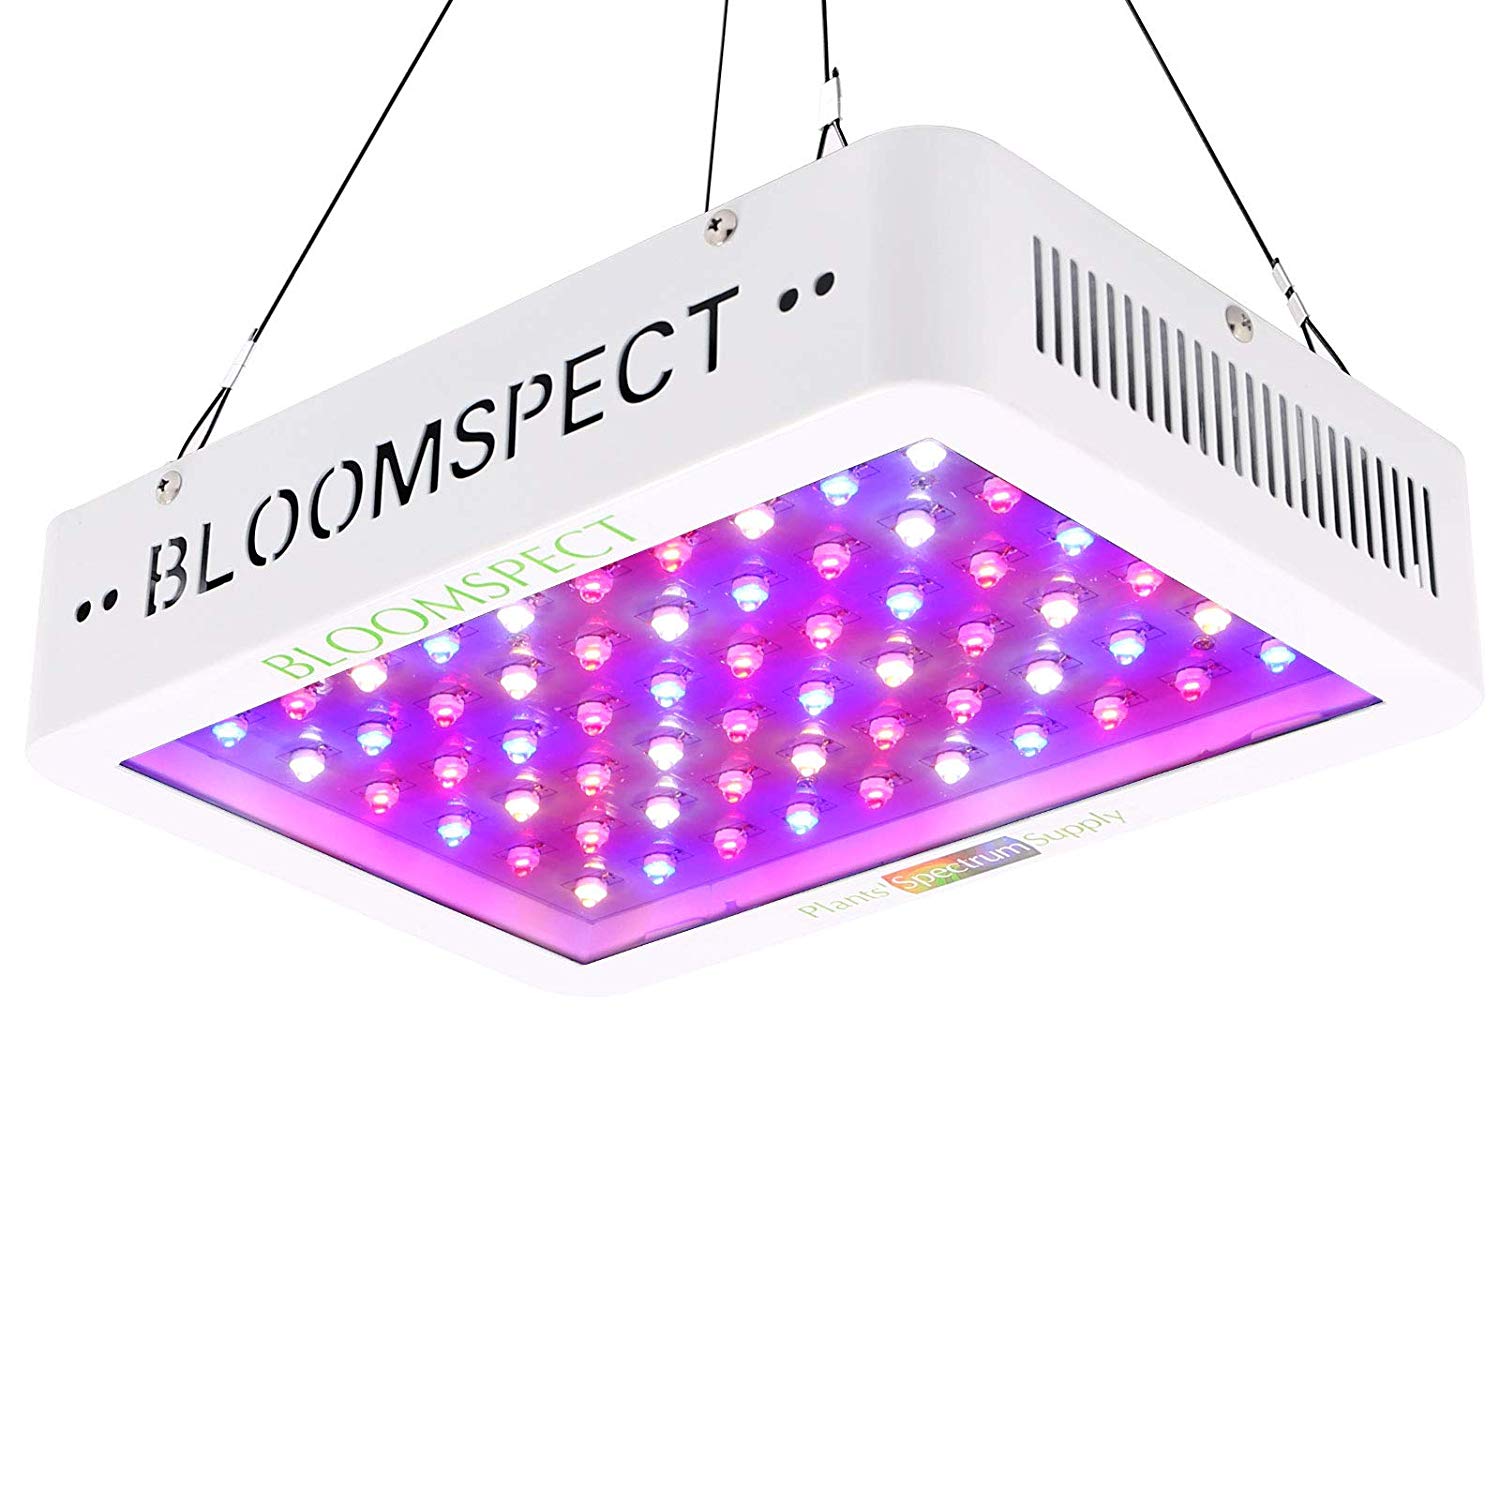 BLOOMSPECT 600W LED Grow Light